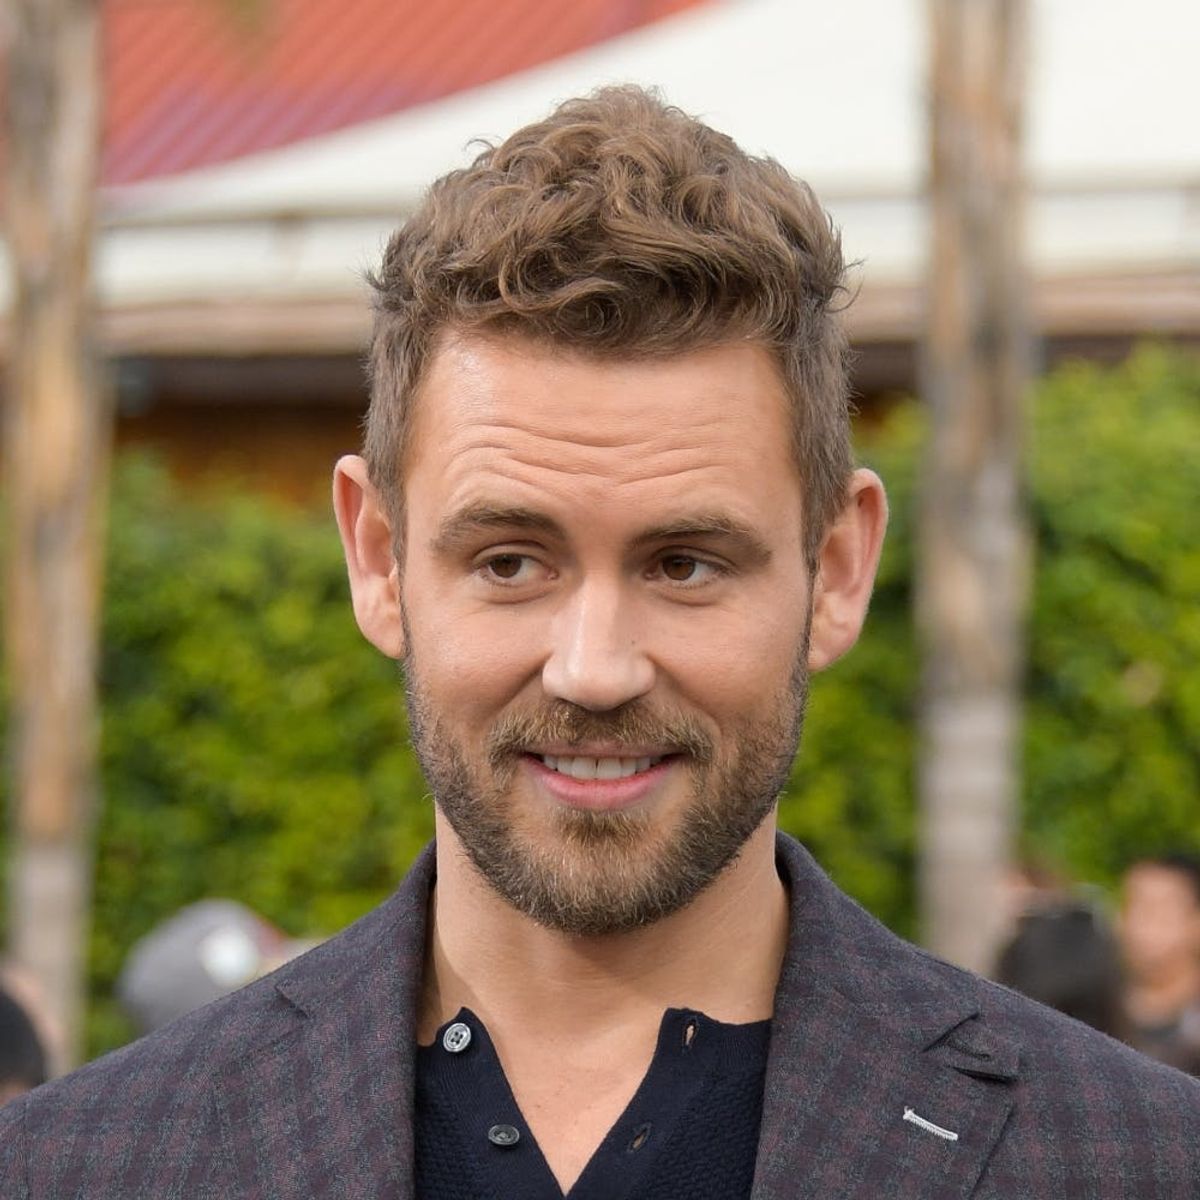 A Bachelor Contestant from Nick Viall’s Season Was Just Arrested